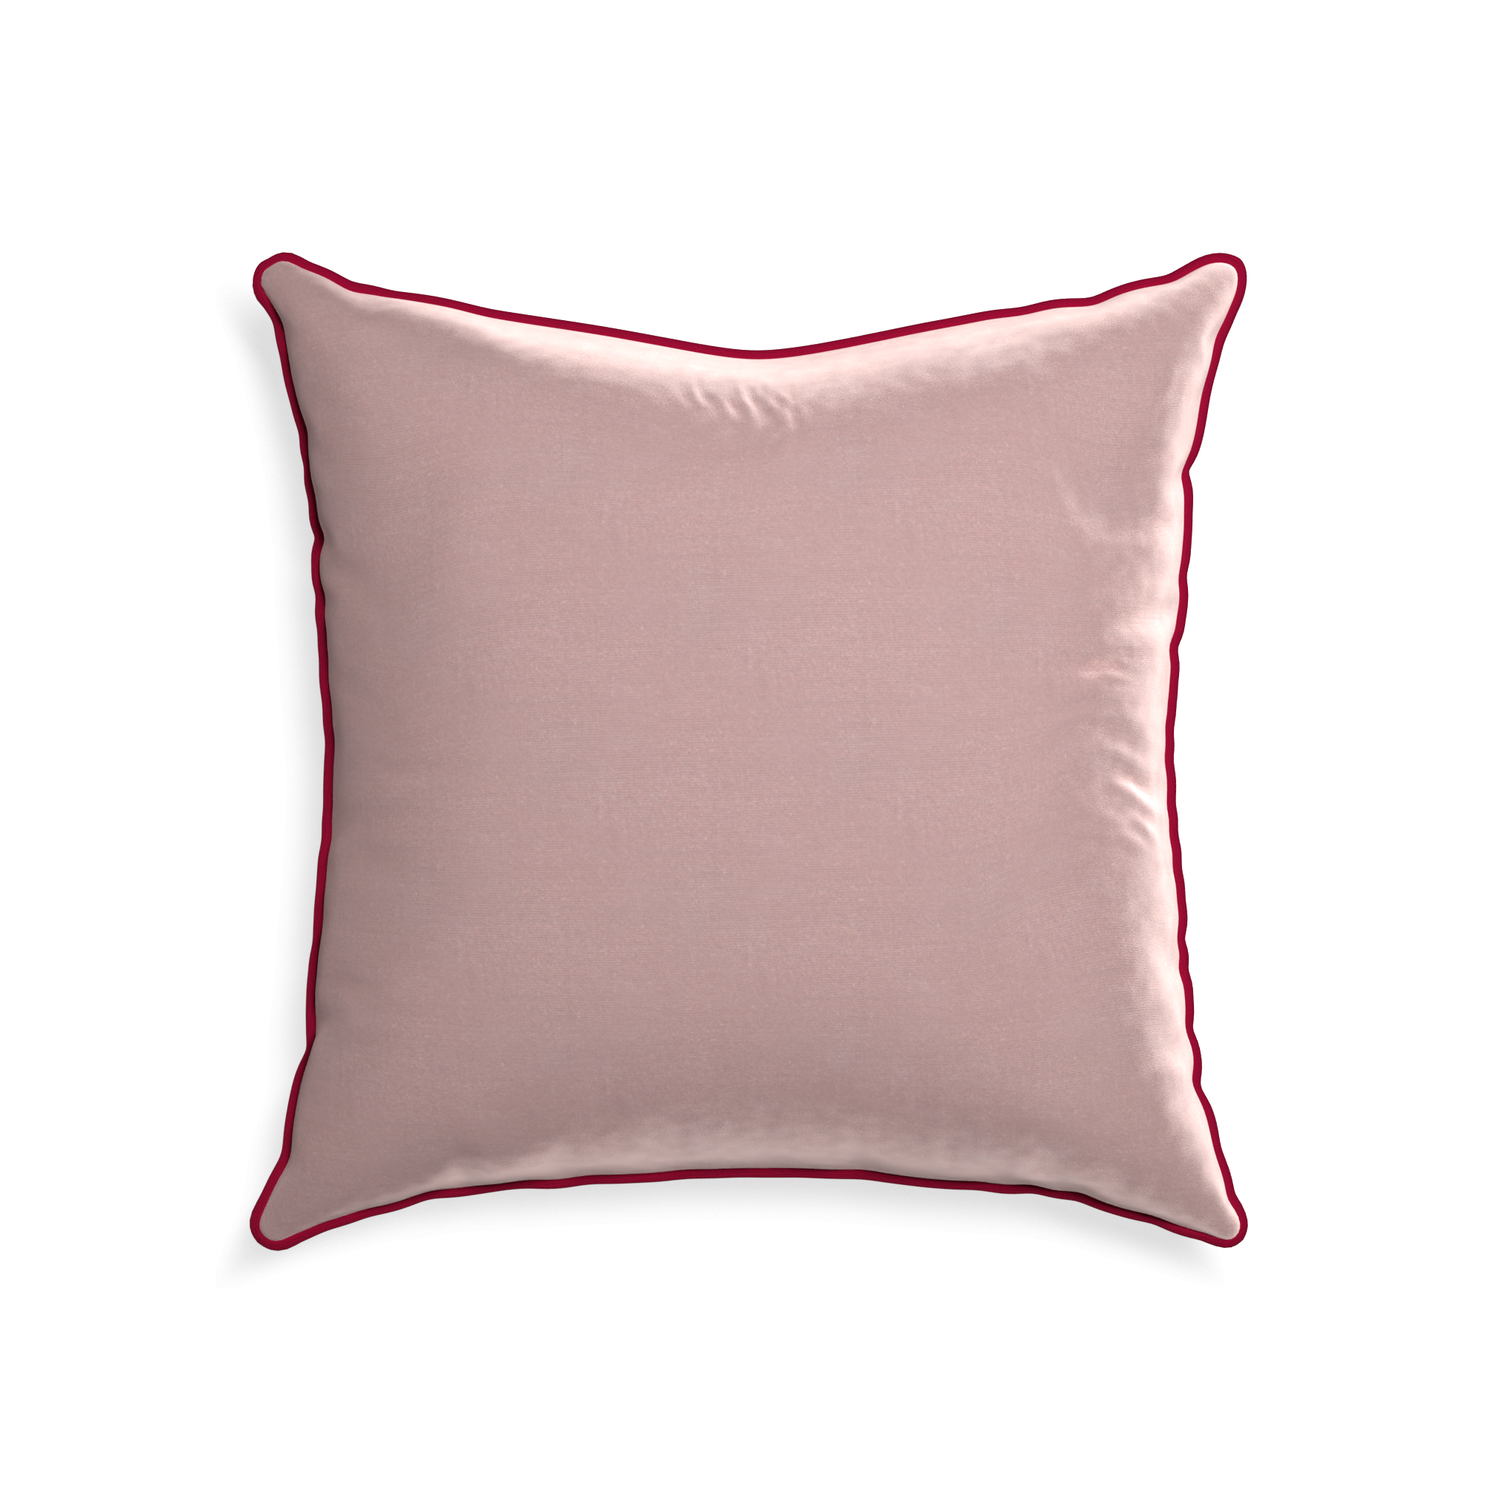 square mauve velvet pillow with dark red piping